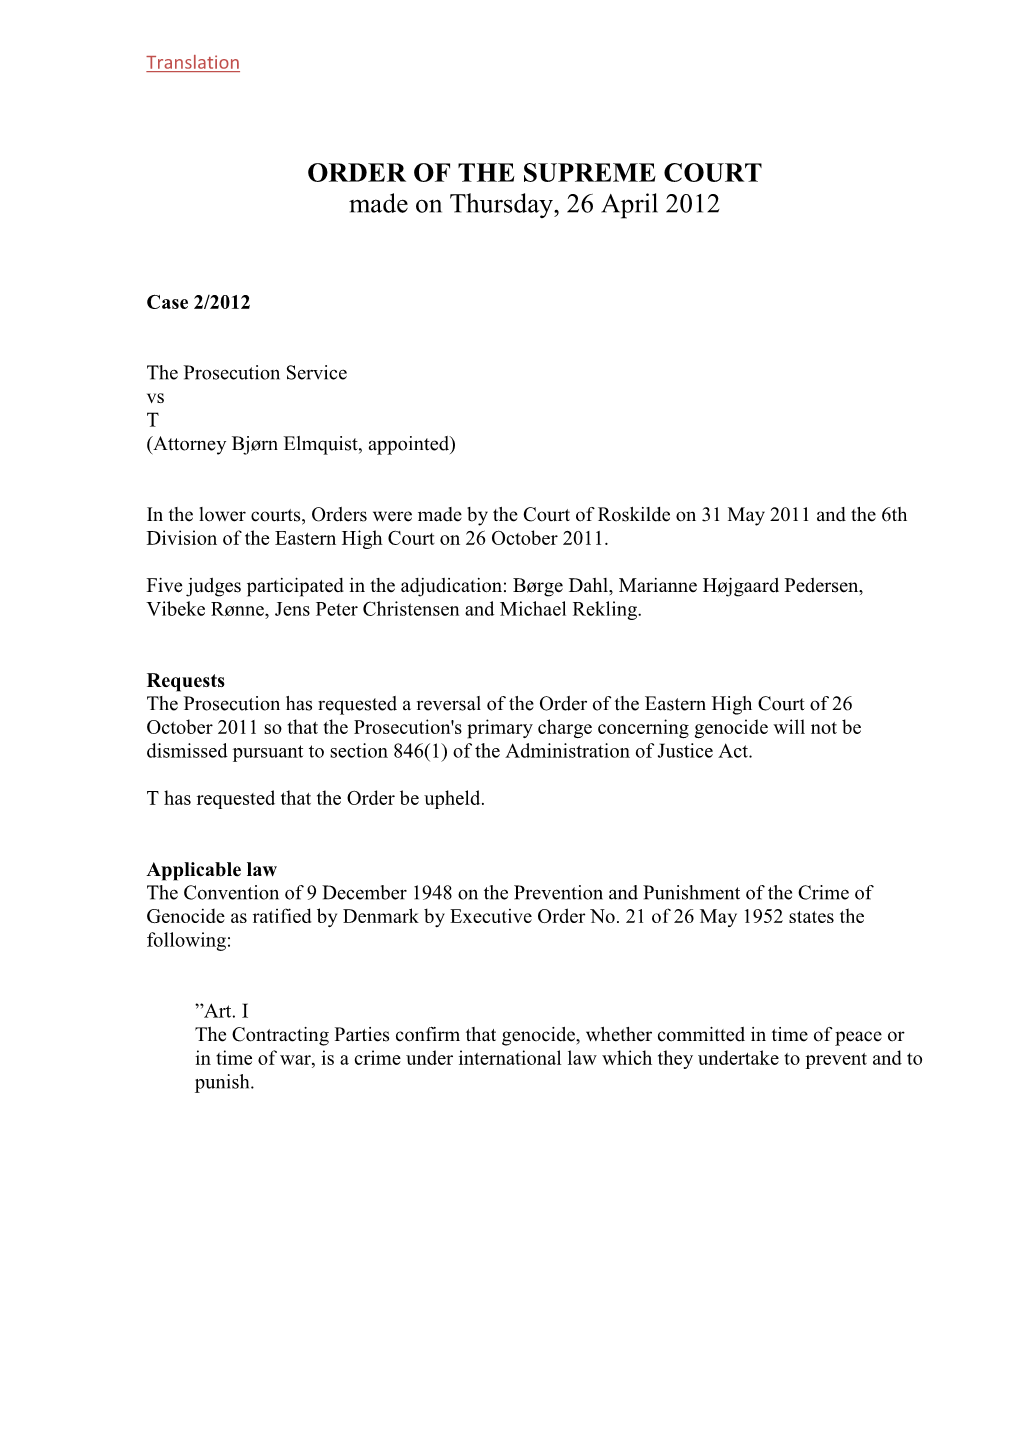 ORDER of the SUPREME COURT Made on Thursday, 26 April 2012